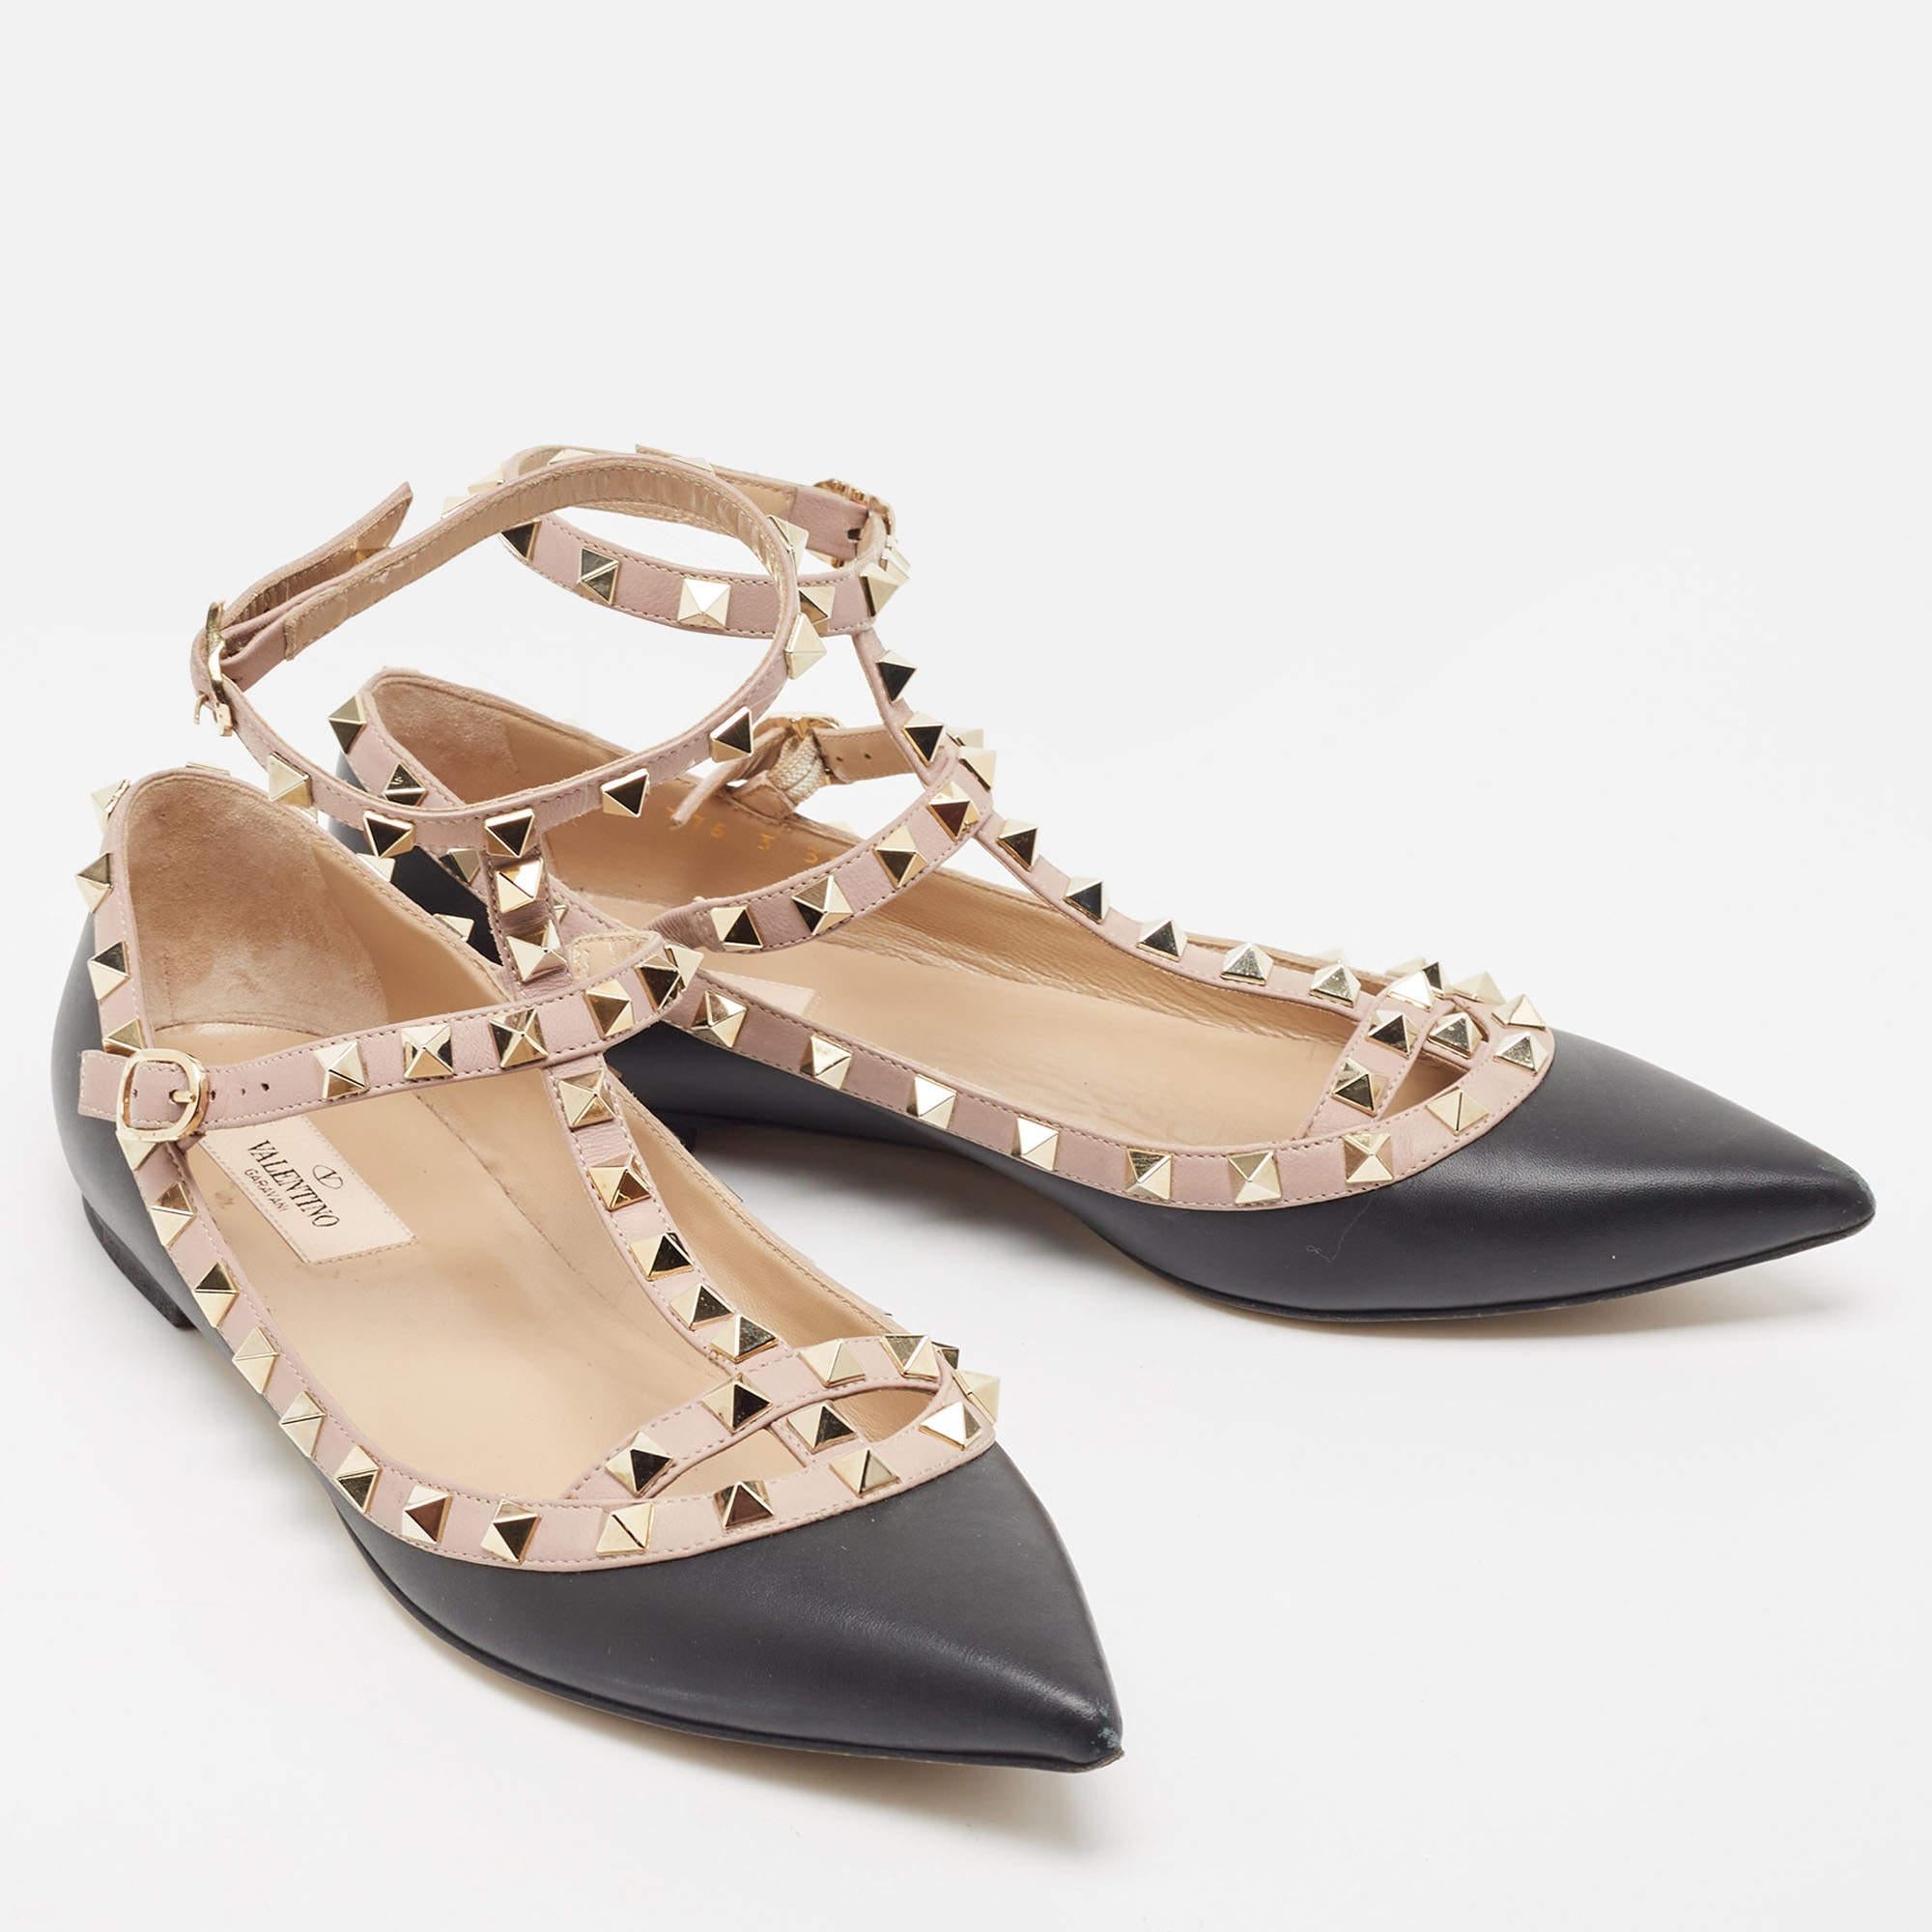 The addition of Rockstuds on the straps of these Valentino flats leads to instant brand identification. Made from leather, they have a black shade and flaunt an ankle buckle closure.

